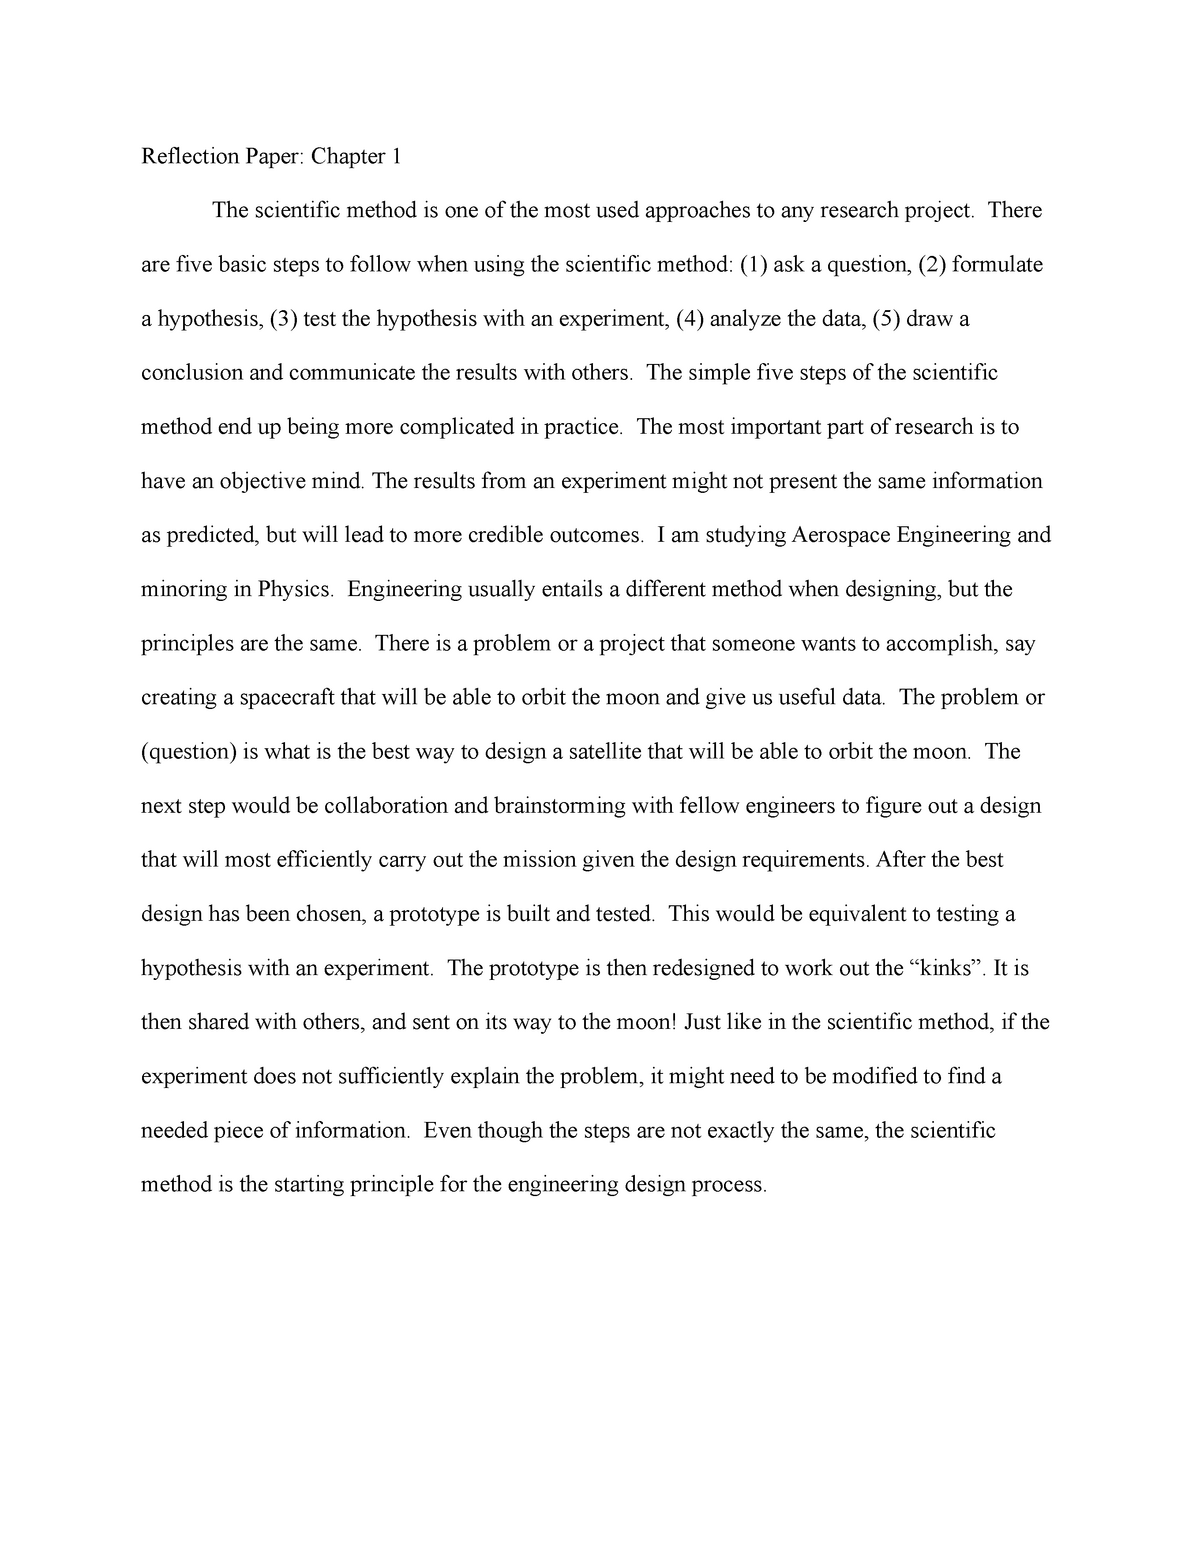 reflection paper about chapter 1 research brainly